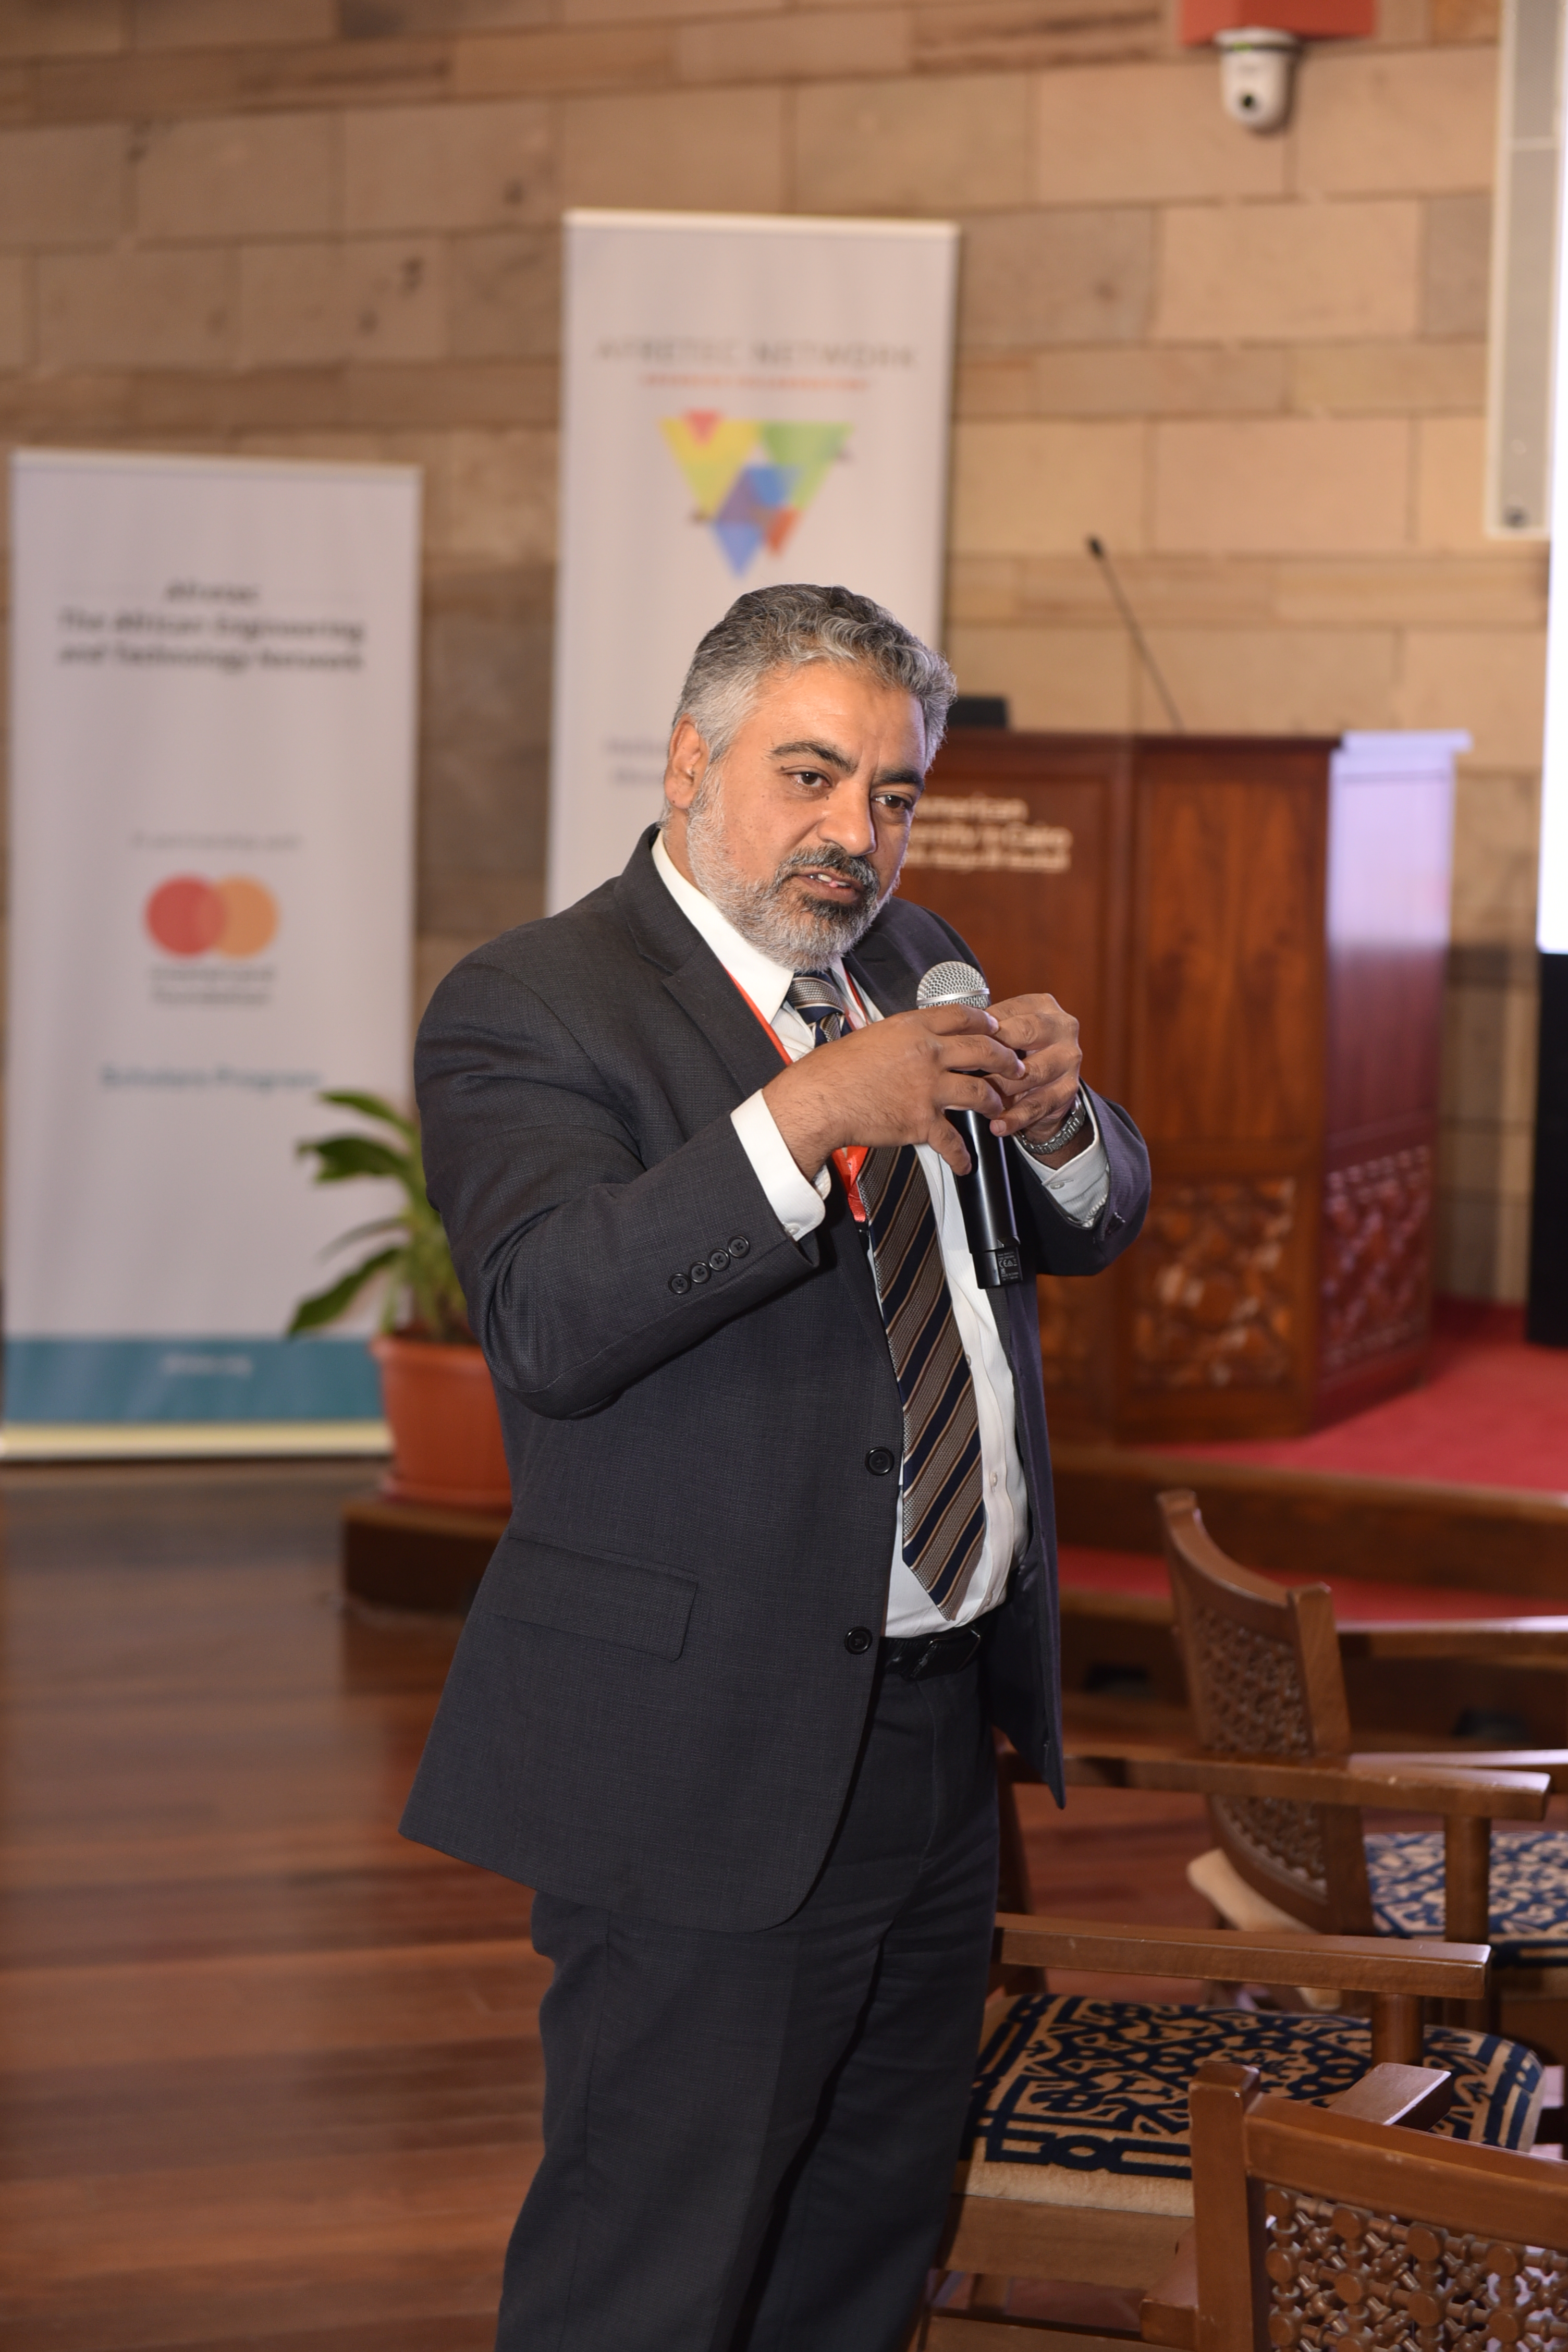 Professor Ismail stands and presents at the conference, speaking into a microphone and gesturing with his other hand.